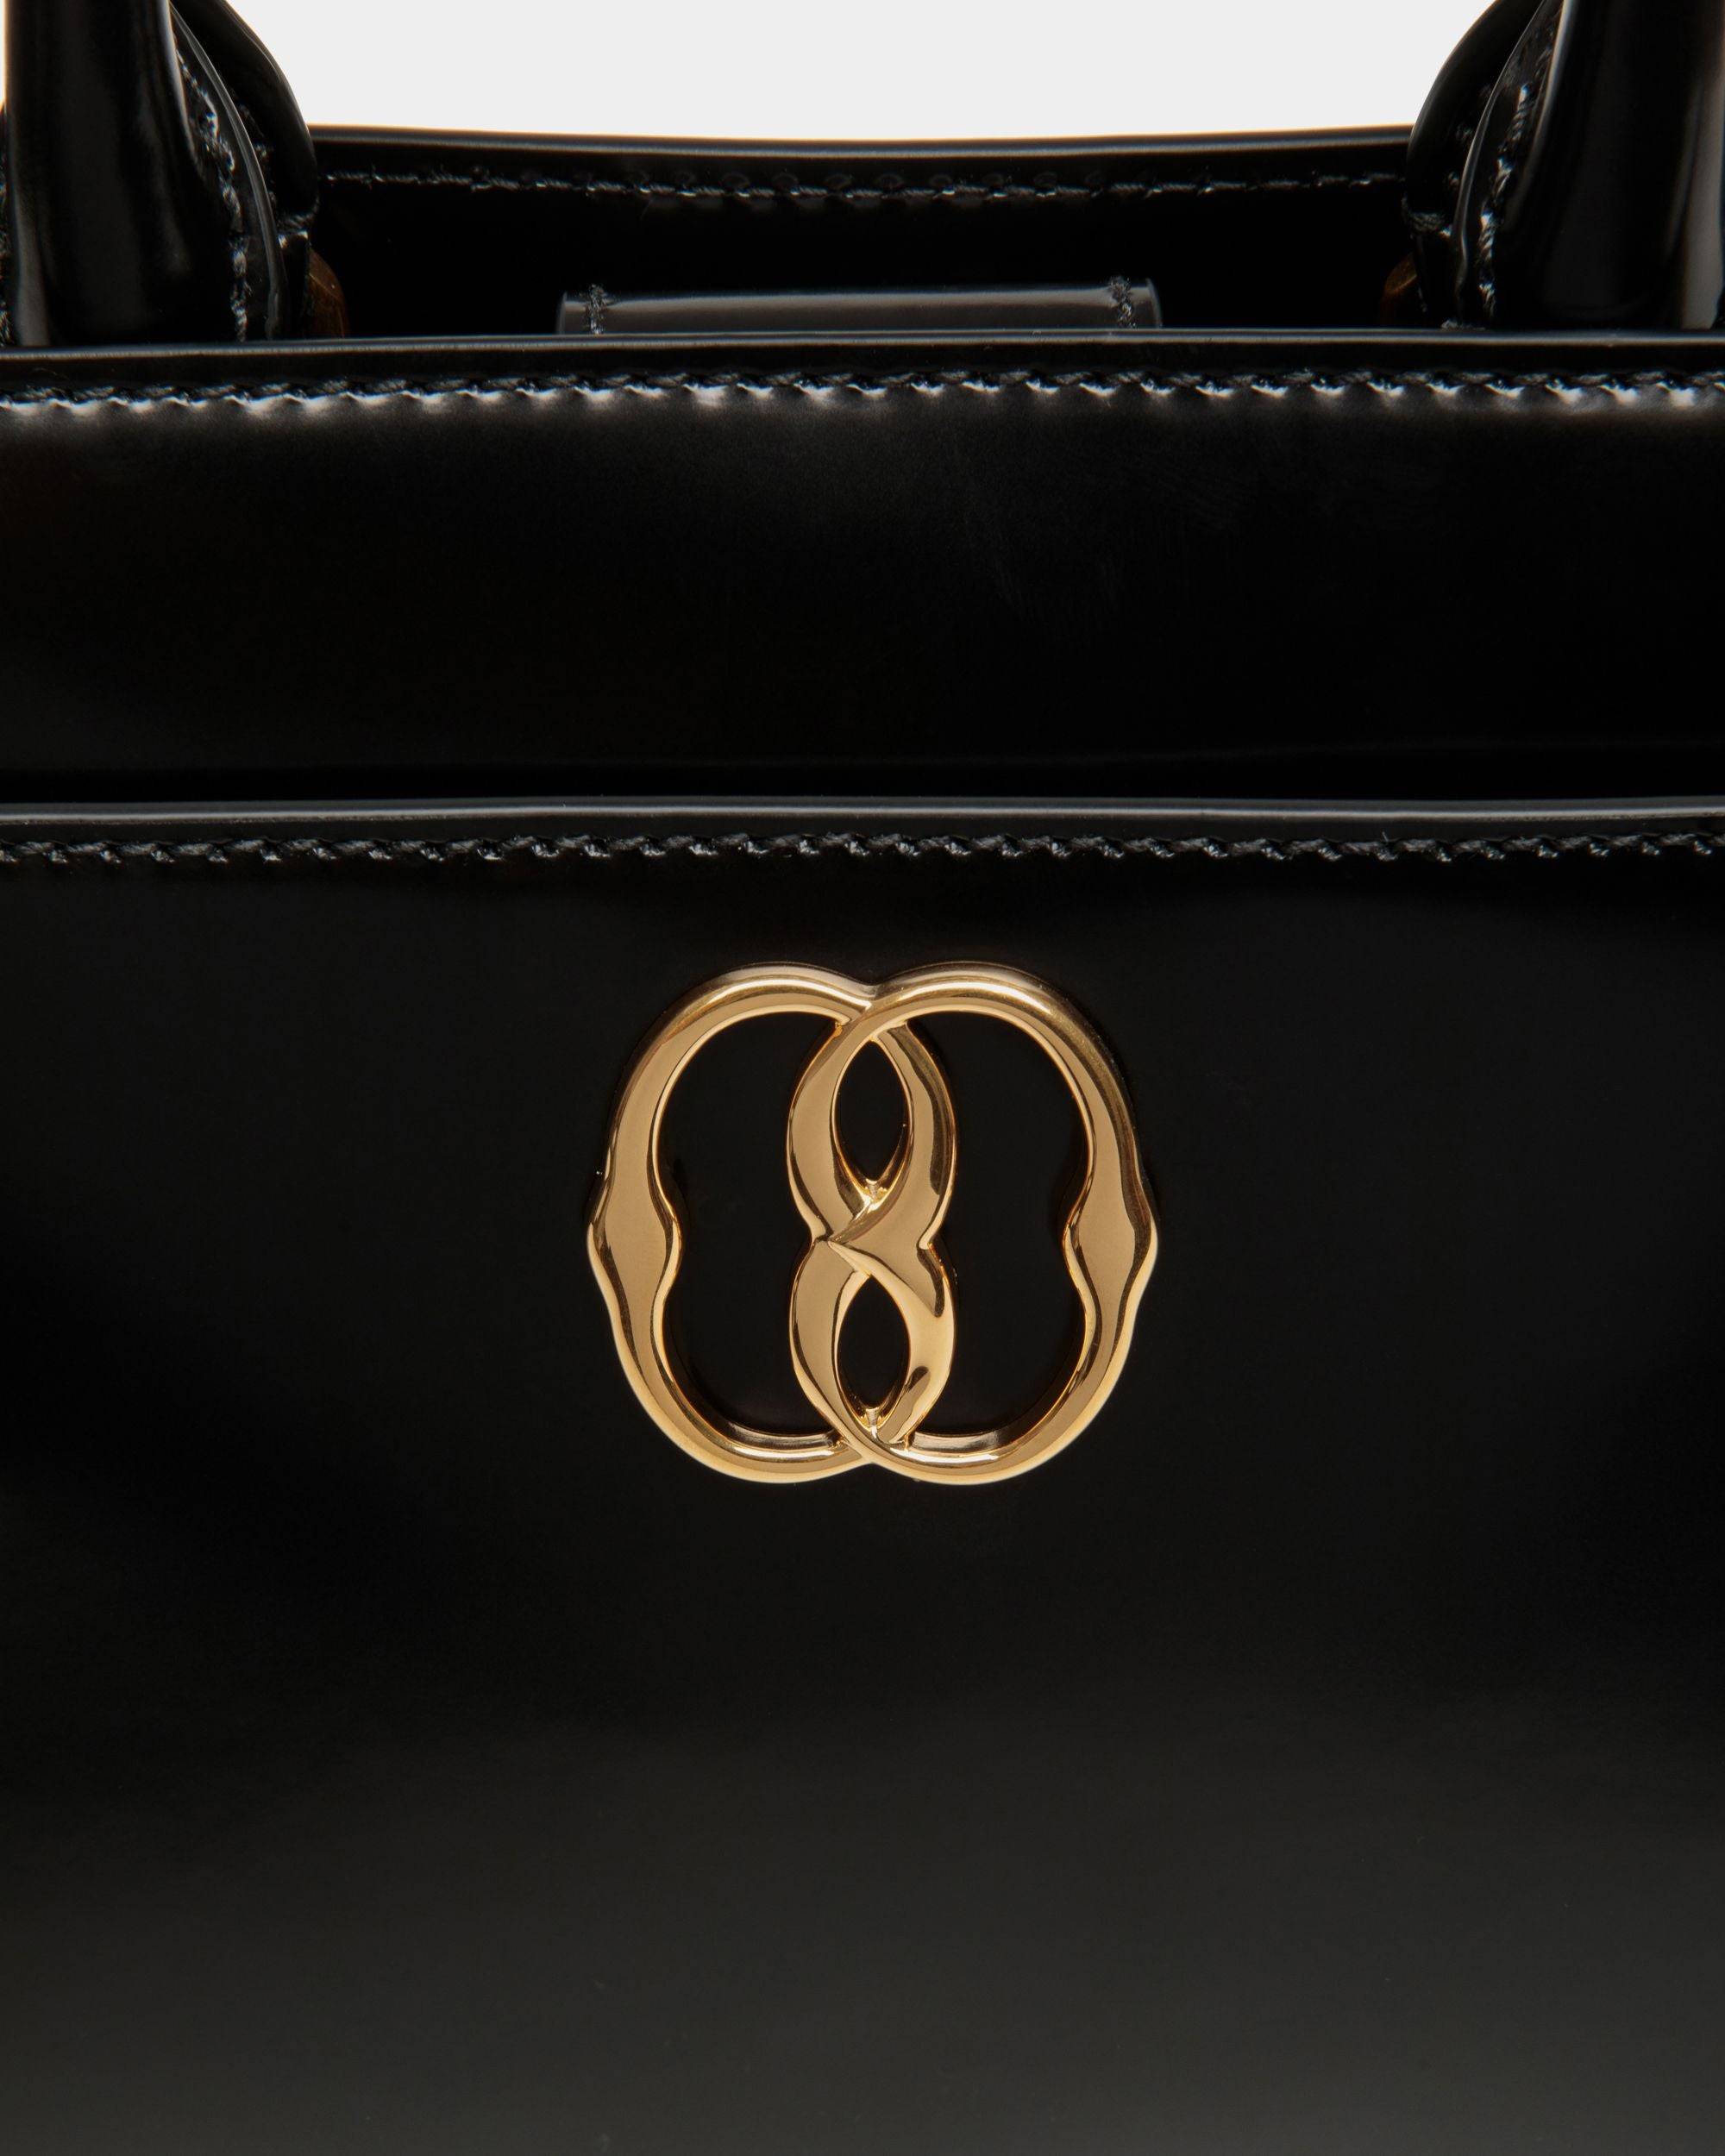 Emblem | Women's Small Tote Bag in Black Brushed Leather | Bally | Still Life Detail